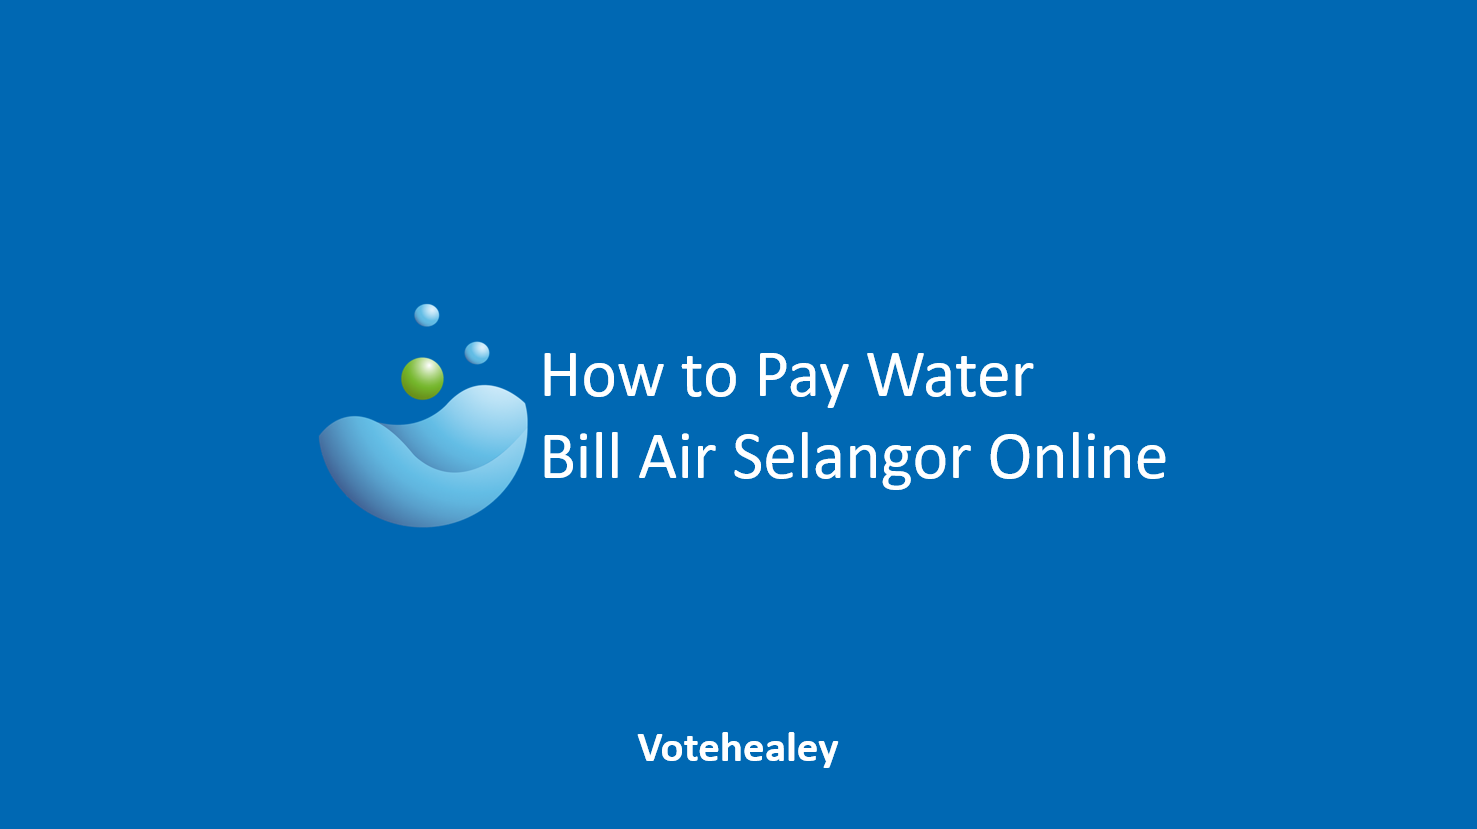 How to Pay Water Bill Air Selangor Online